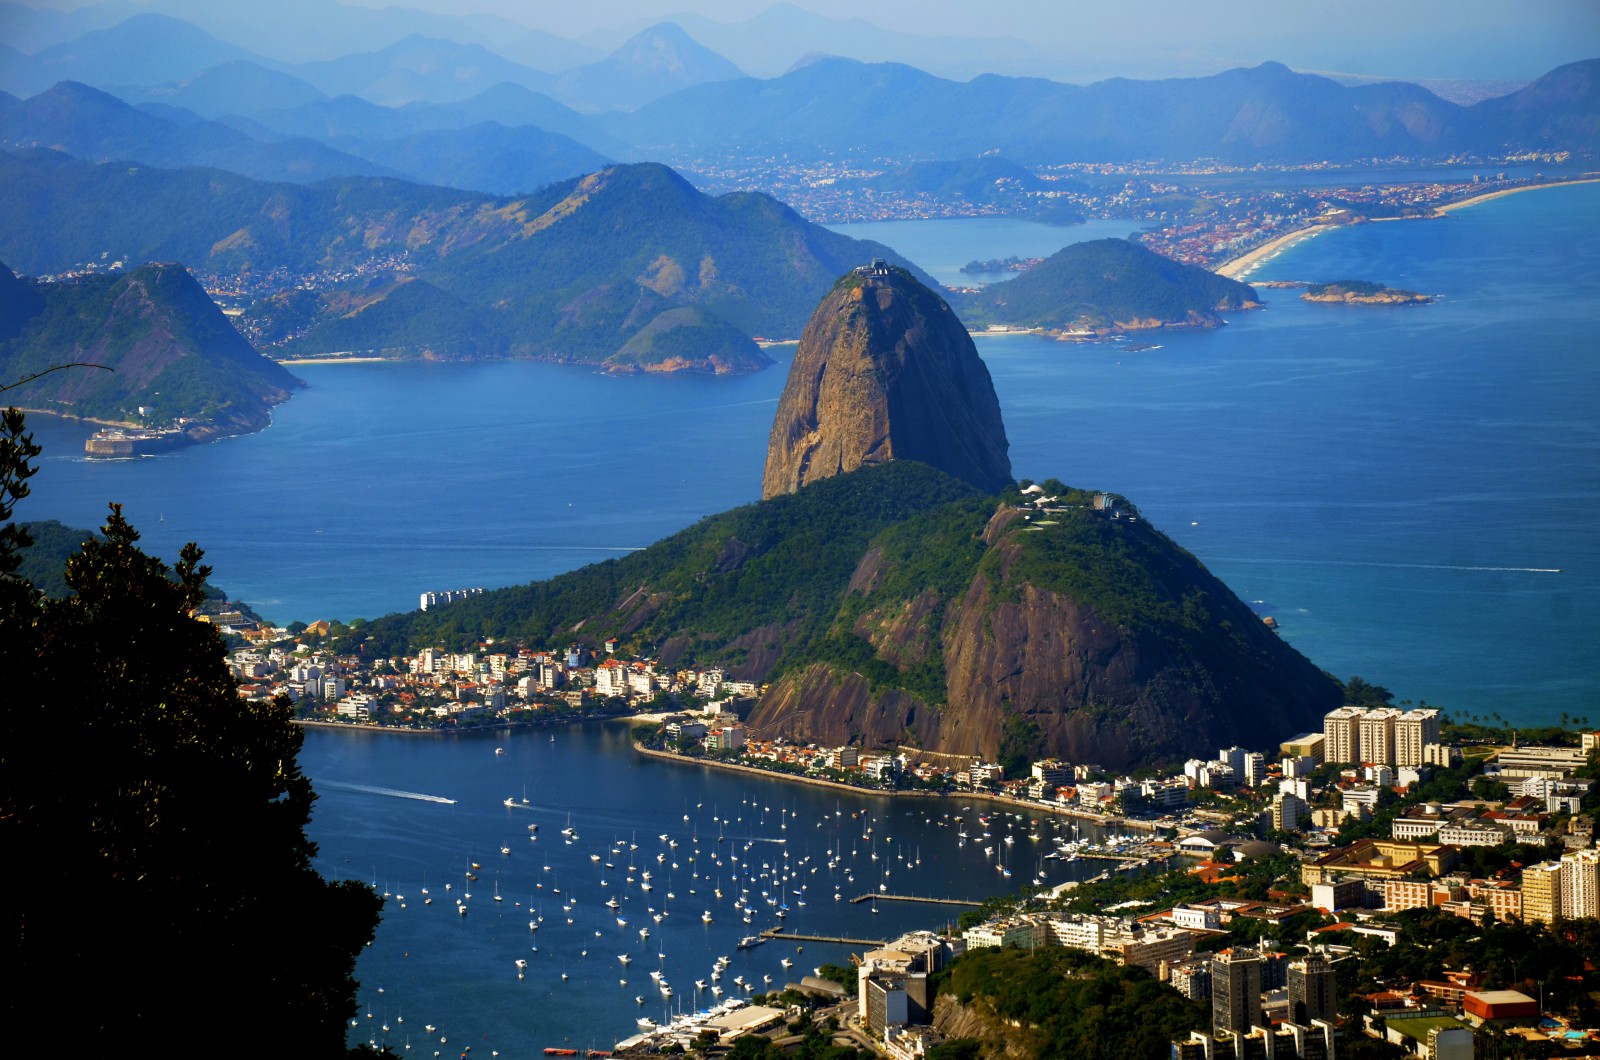 Rio de Janeiro's iconic Guanabara Bay has also become a global symbol of polluted urban waterways during the 2016 Olympic Games. Photo courtesy Rodrigo Soldon 2 via Flickr Creative Commons